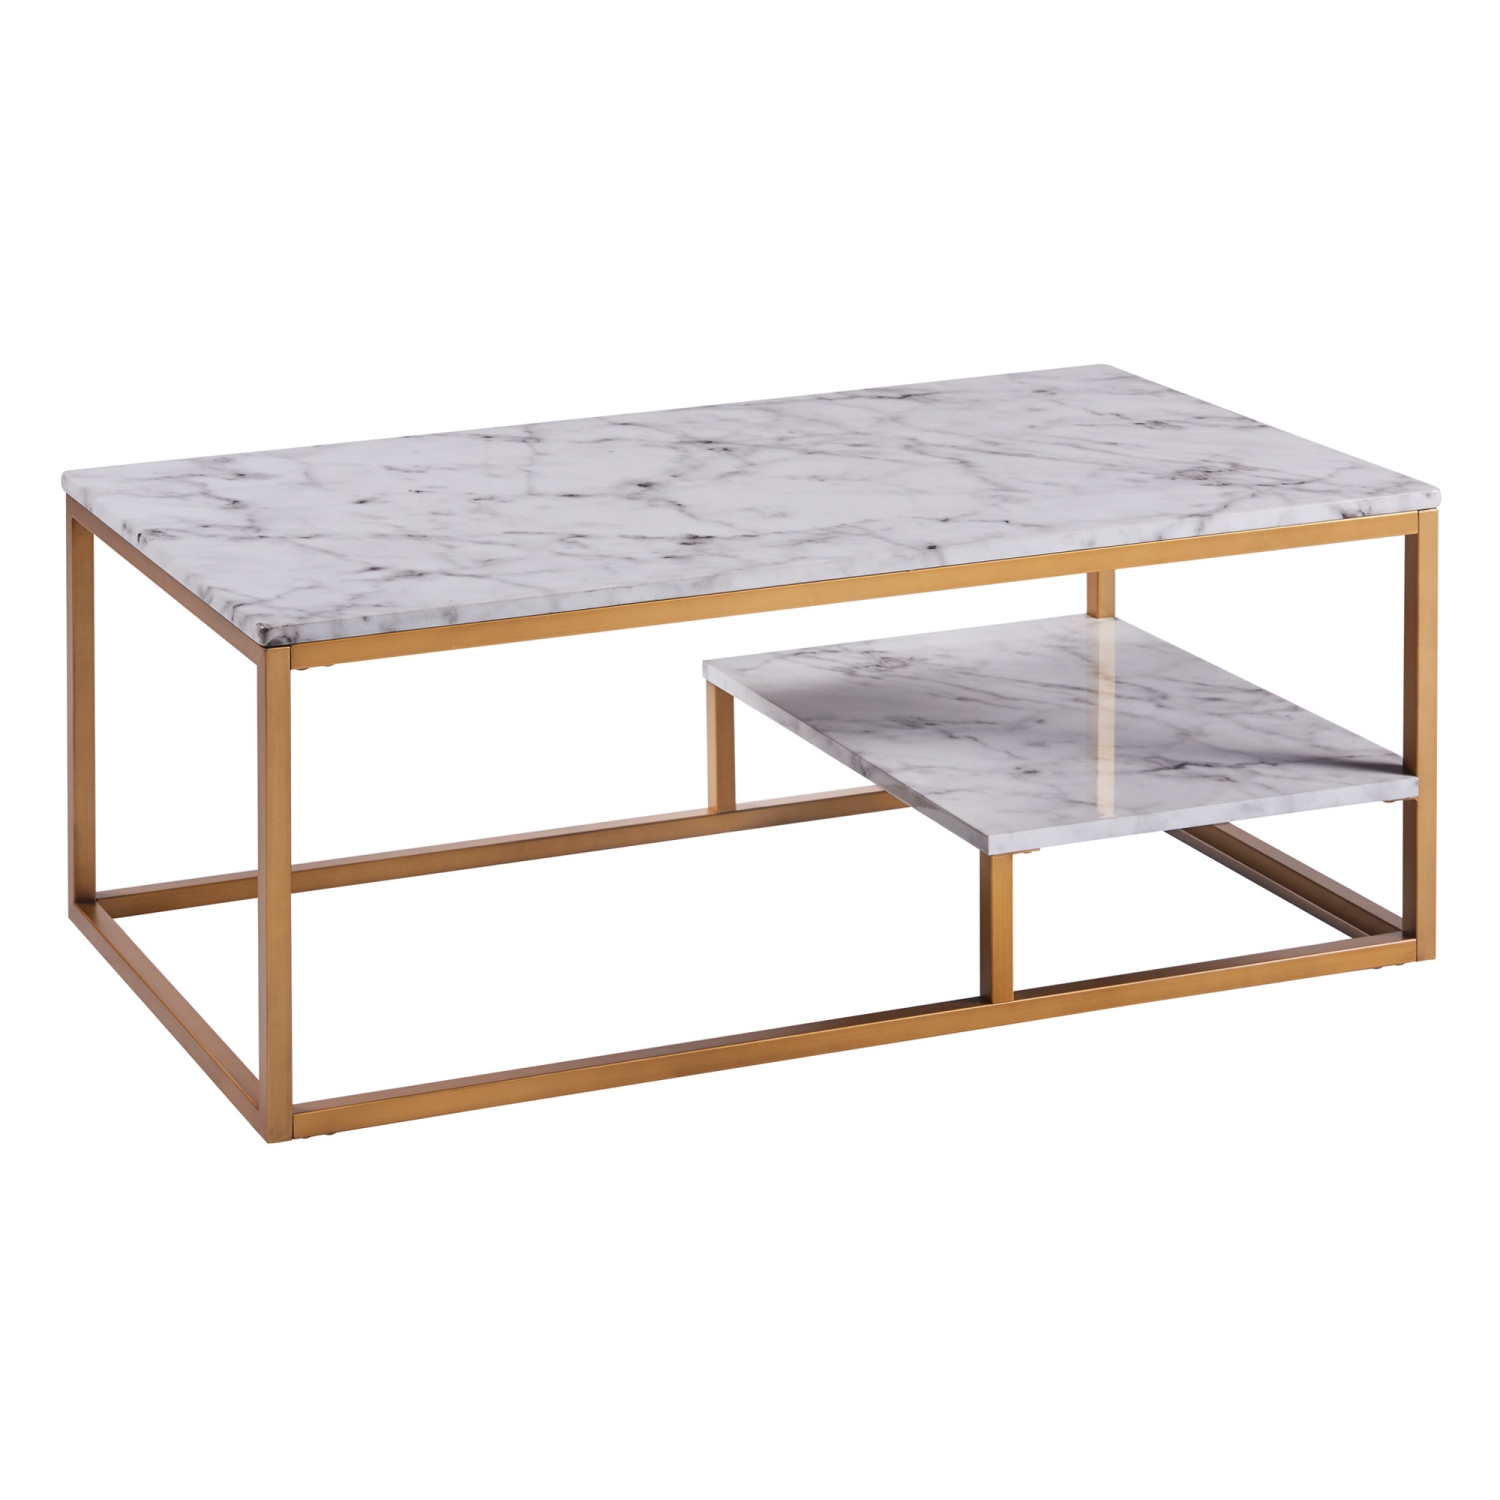 Teamson Home Coffee Table Marble Effect Wooden Modern Living Room Marmo